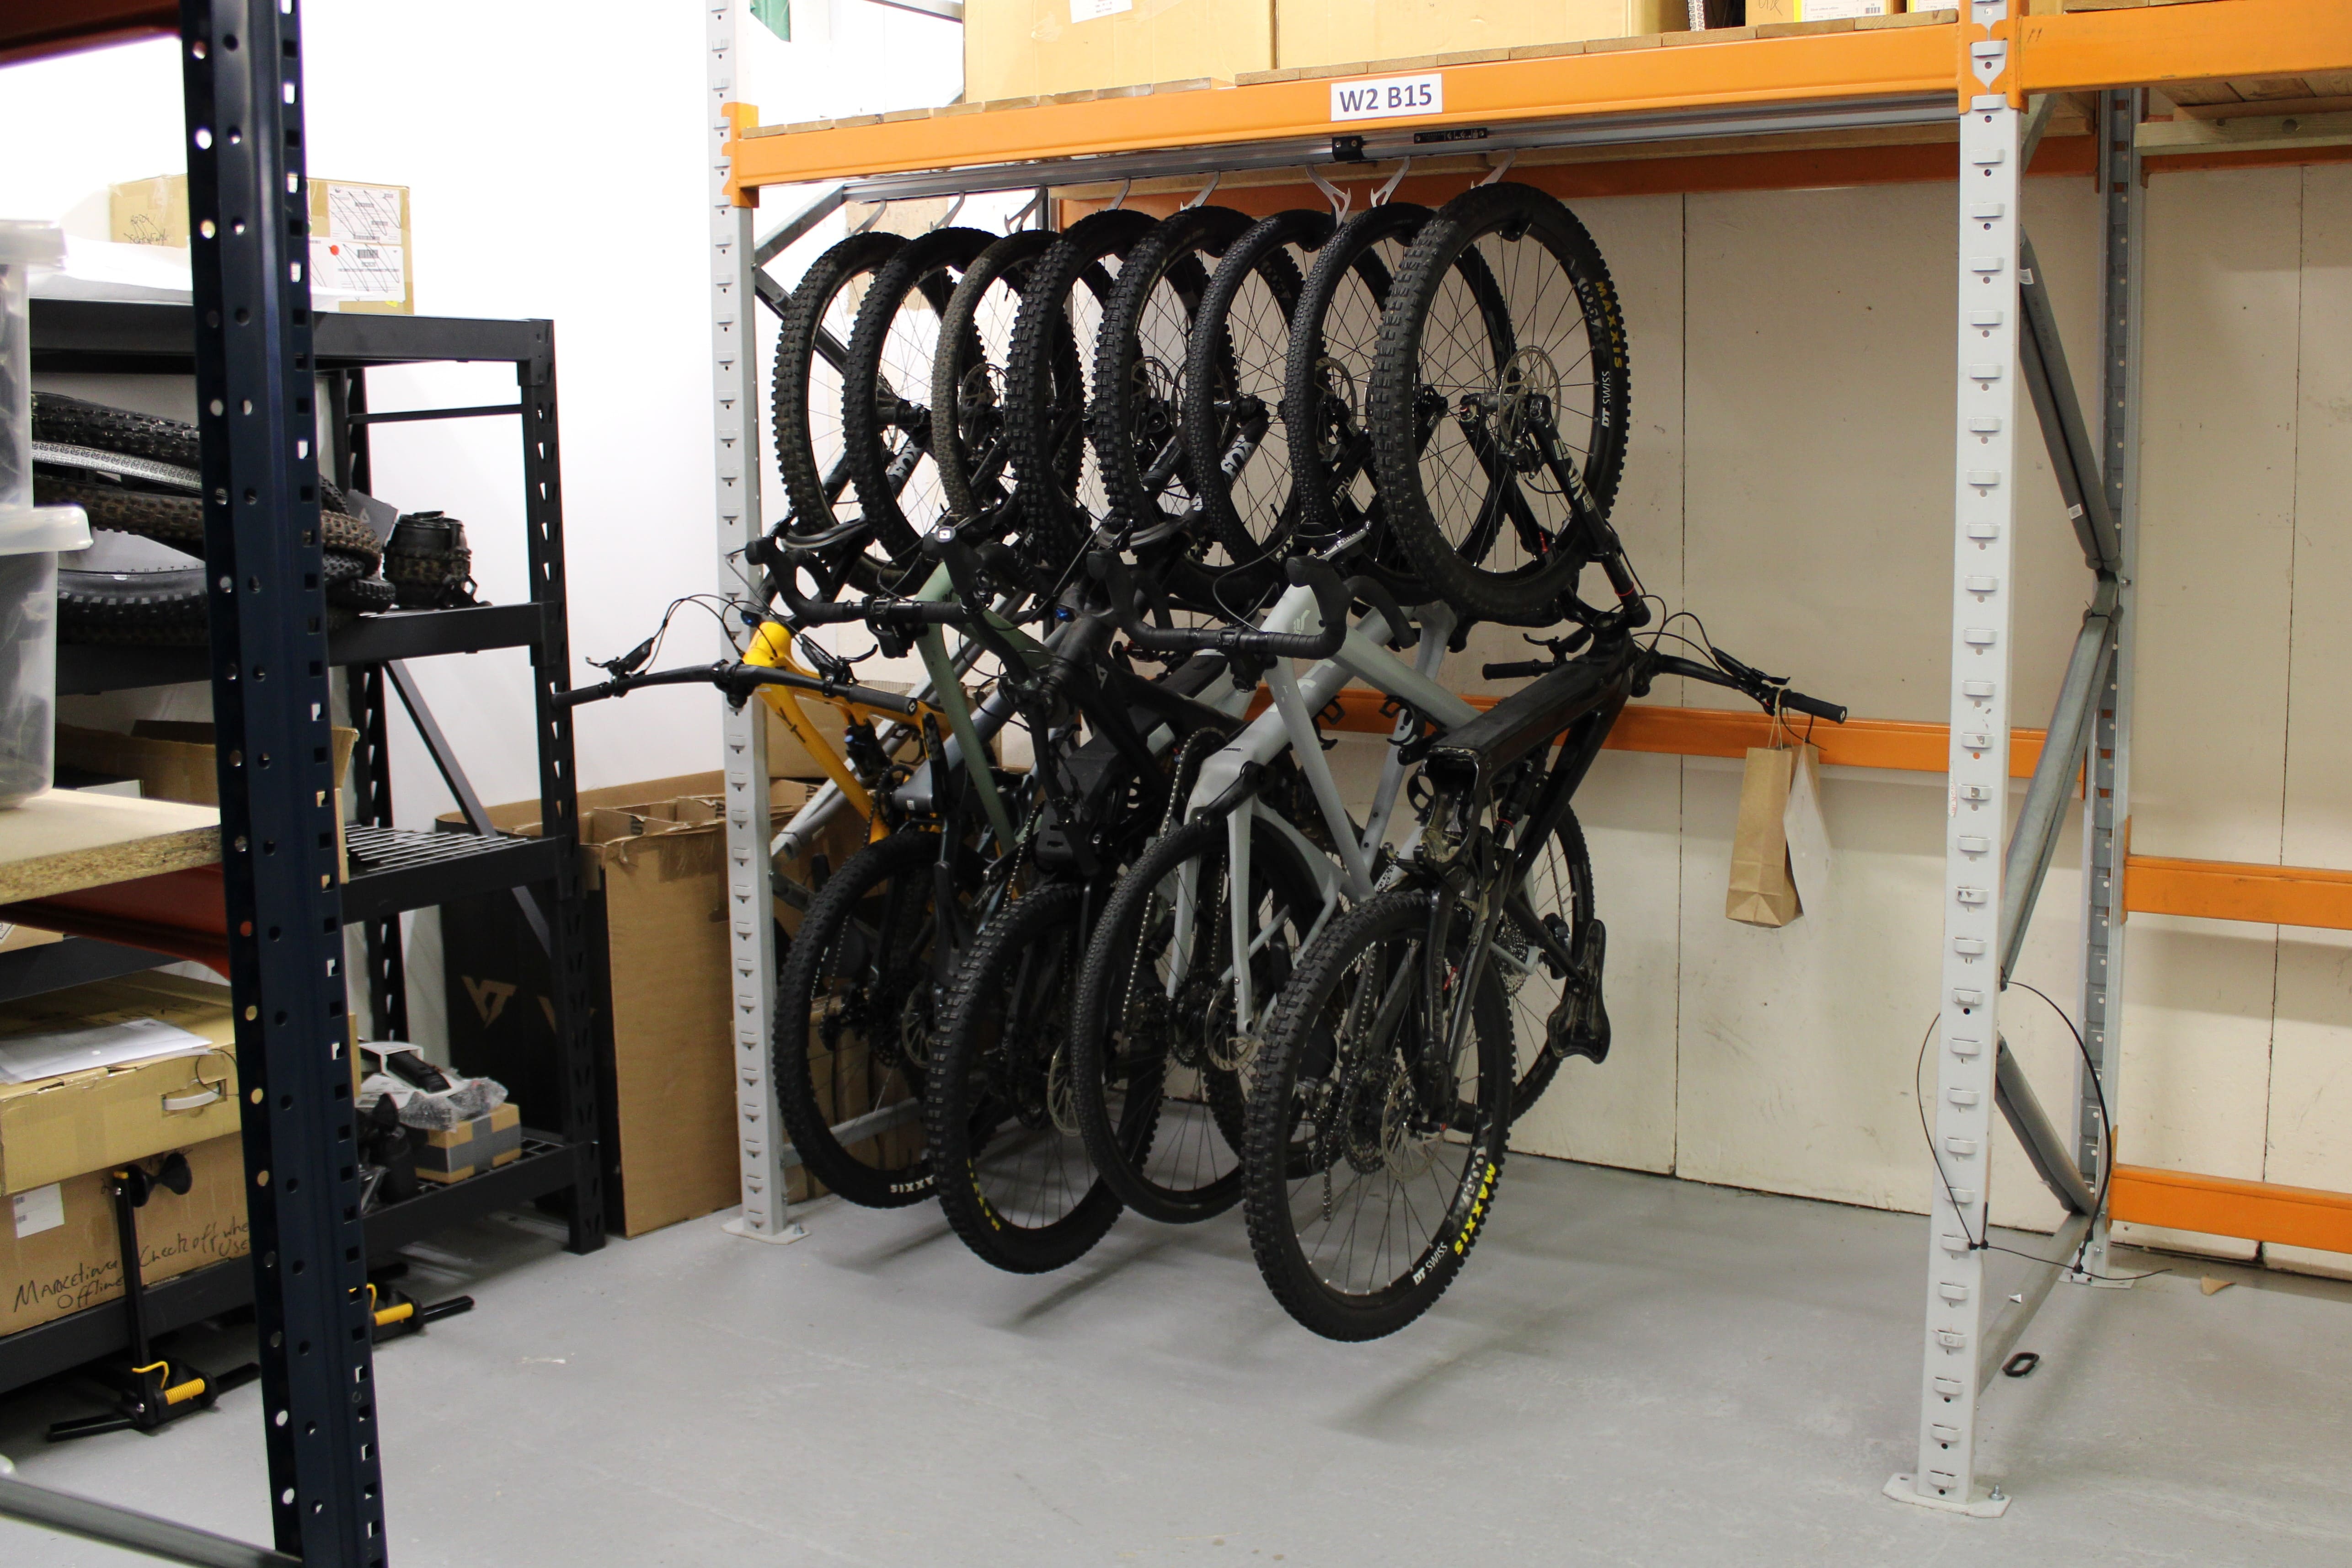 room saved in this warehouse using a SpaceRail bike storage system